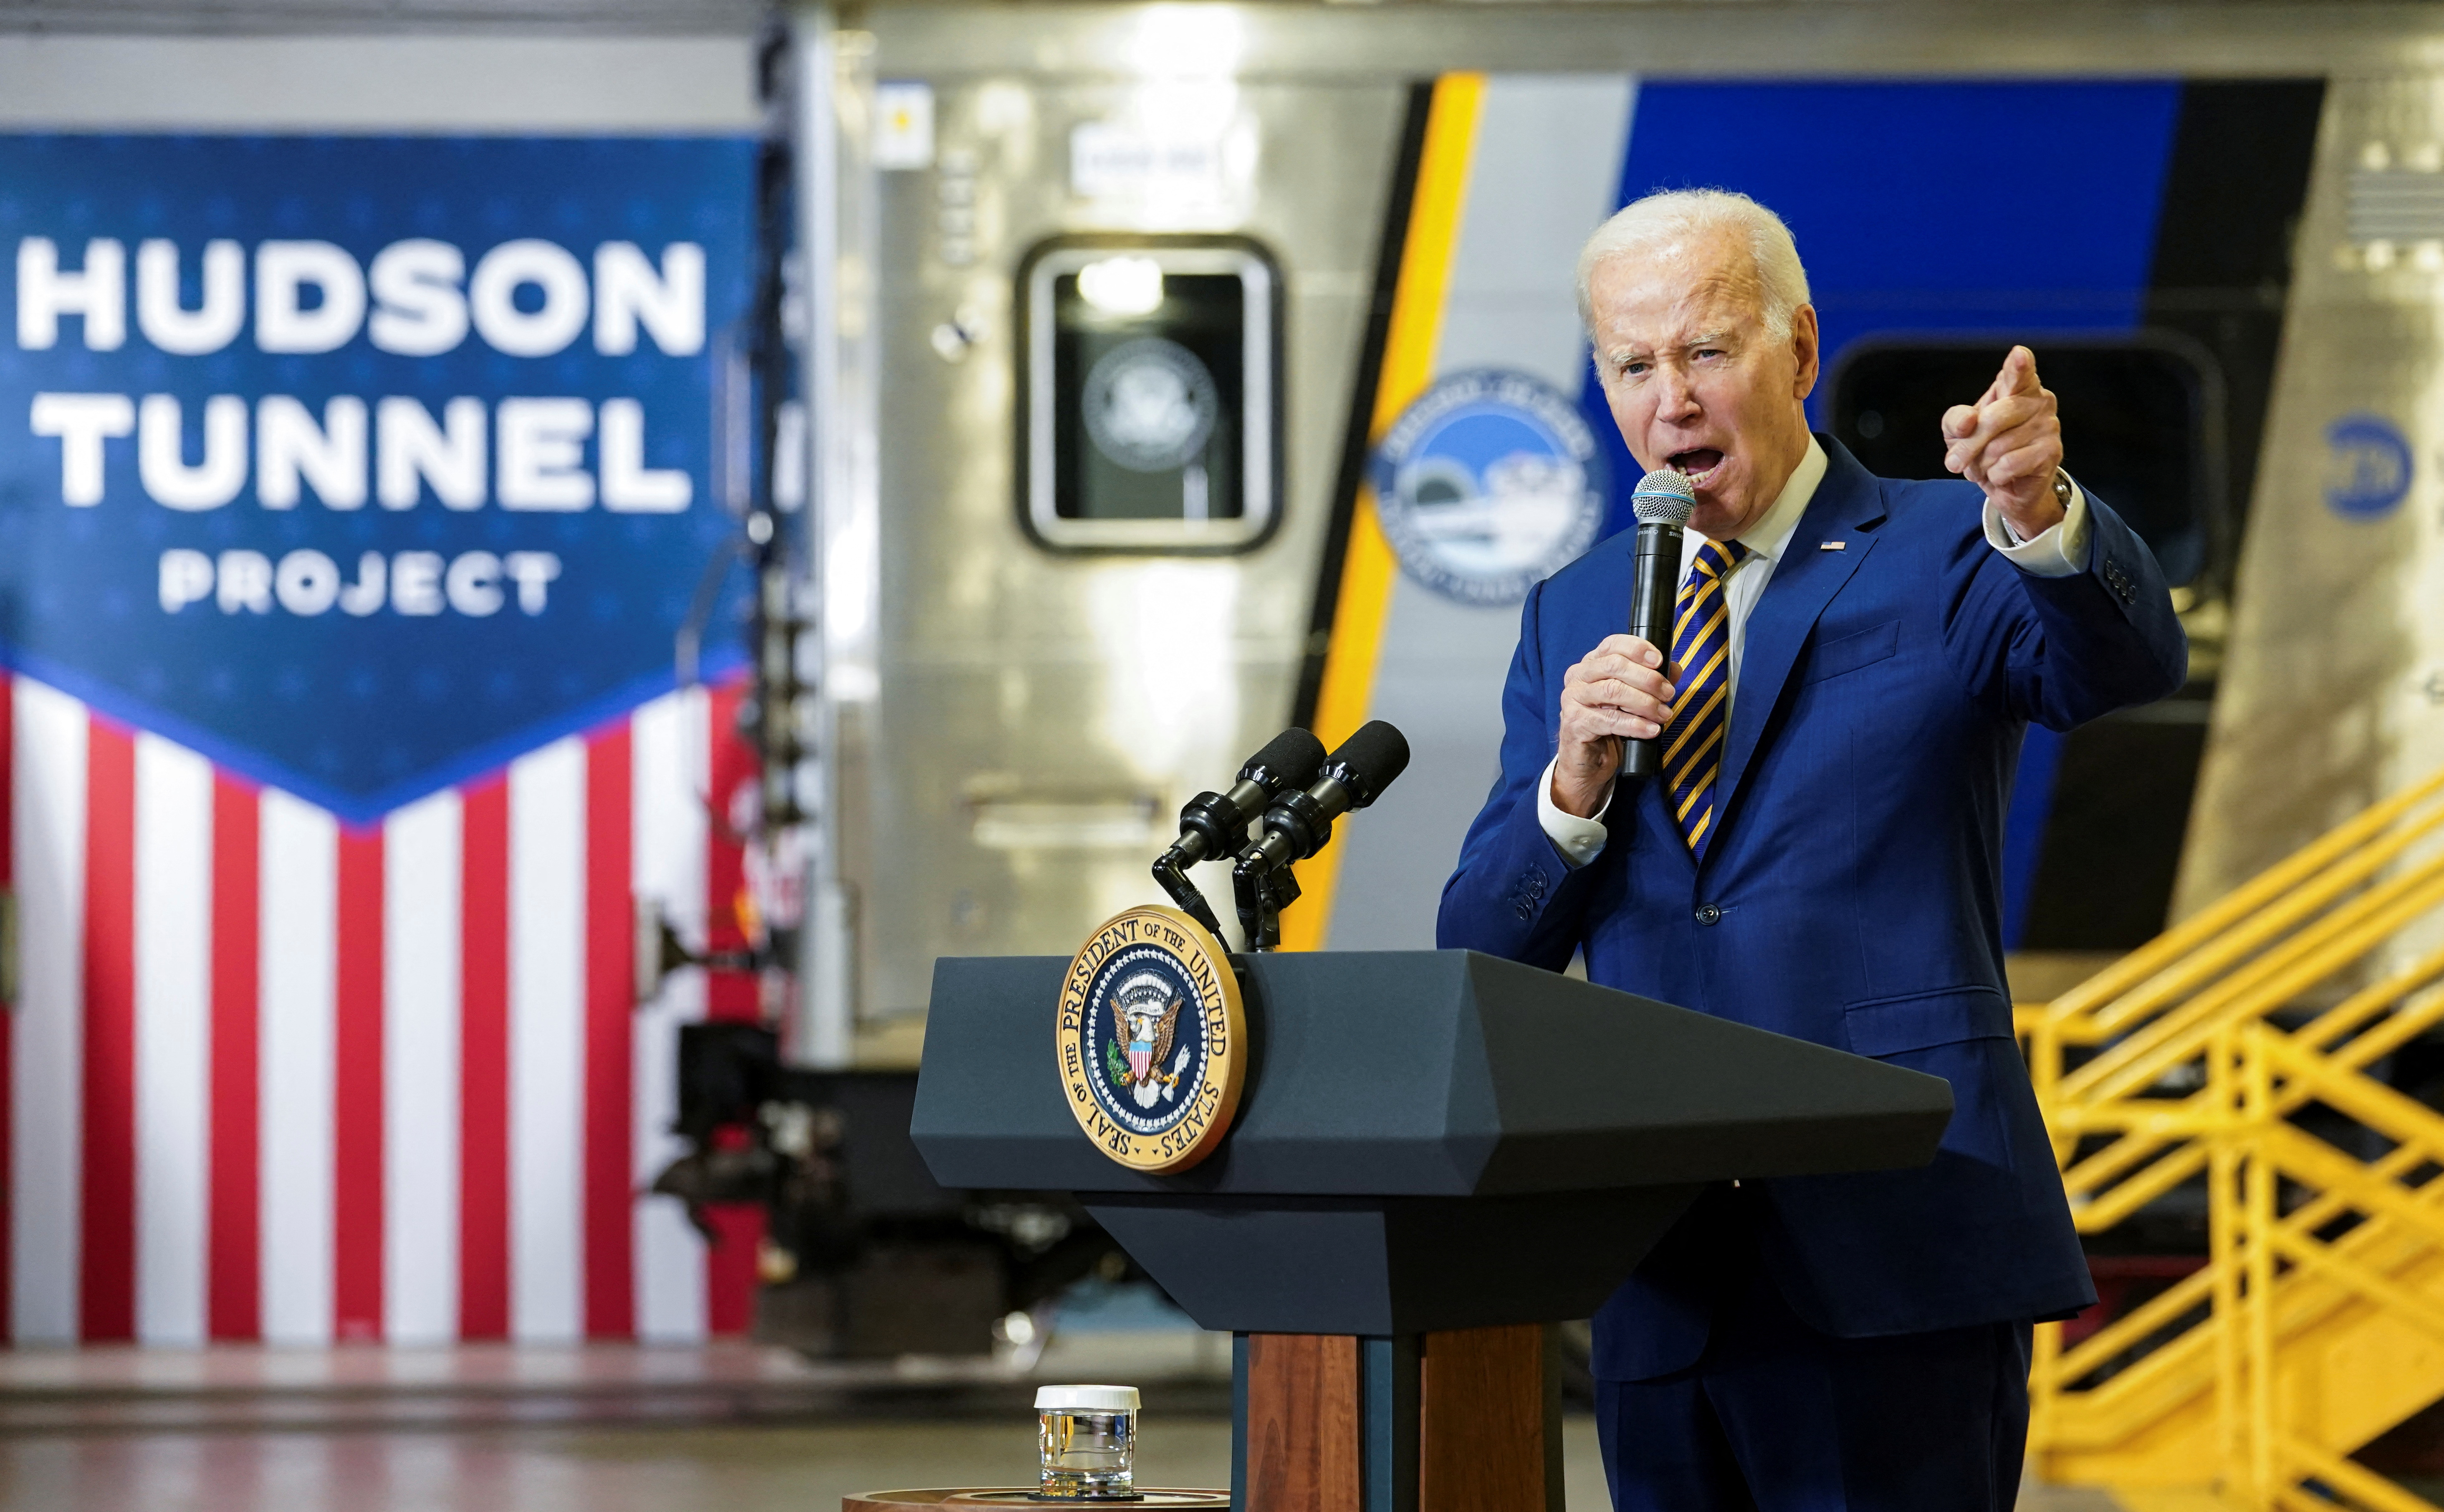 U.S. President Biden touts infrastructure spending on the Hudson River Tunnel project in New York City